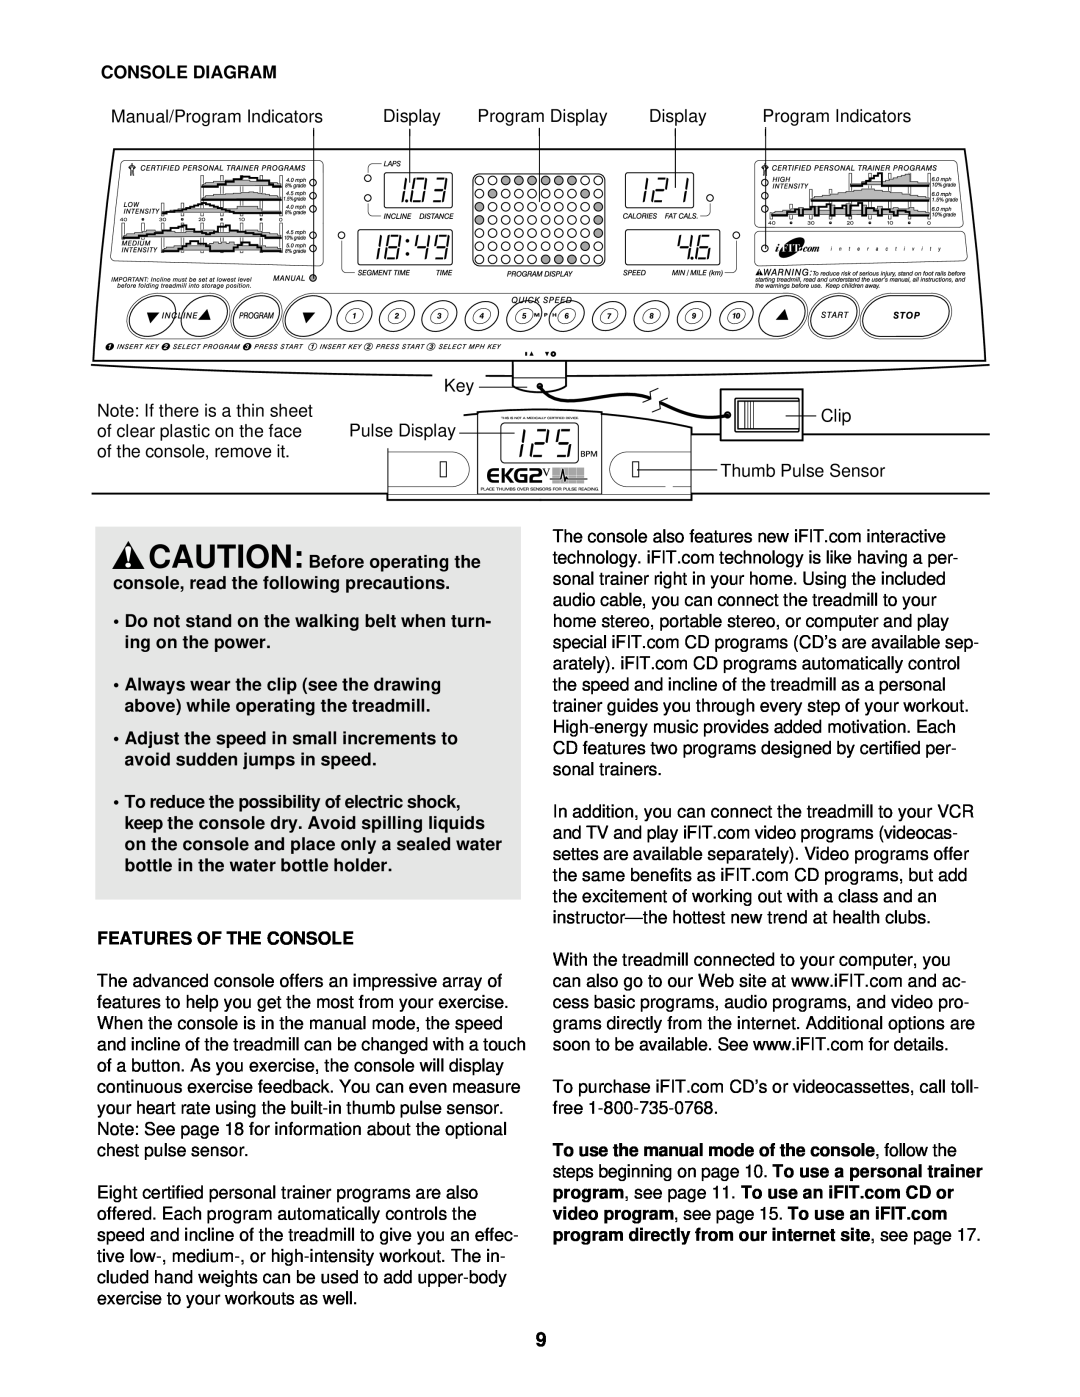 ProForm DRTL99720 Console Diagram, Adjust the speed in small increments to avoid sudden jumps in speed, see page, video 